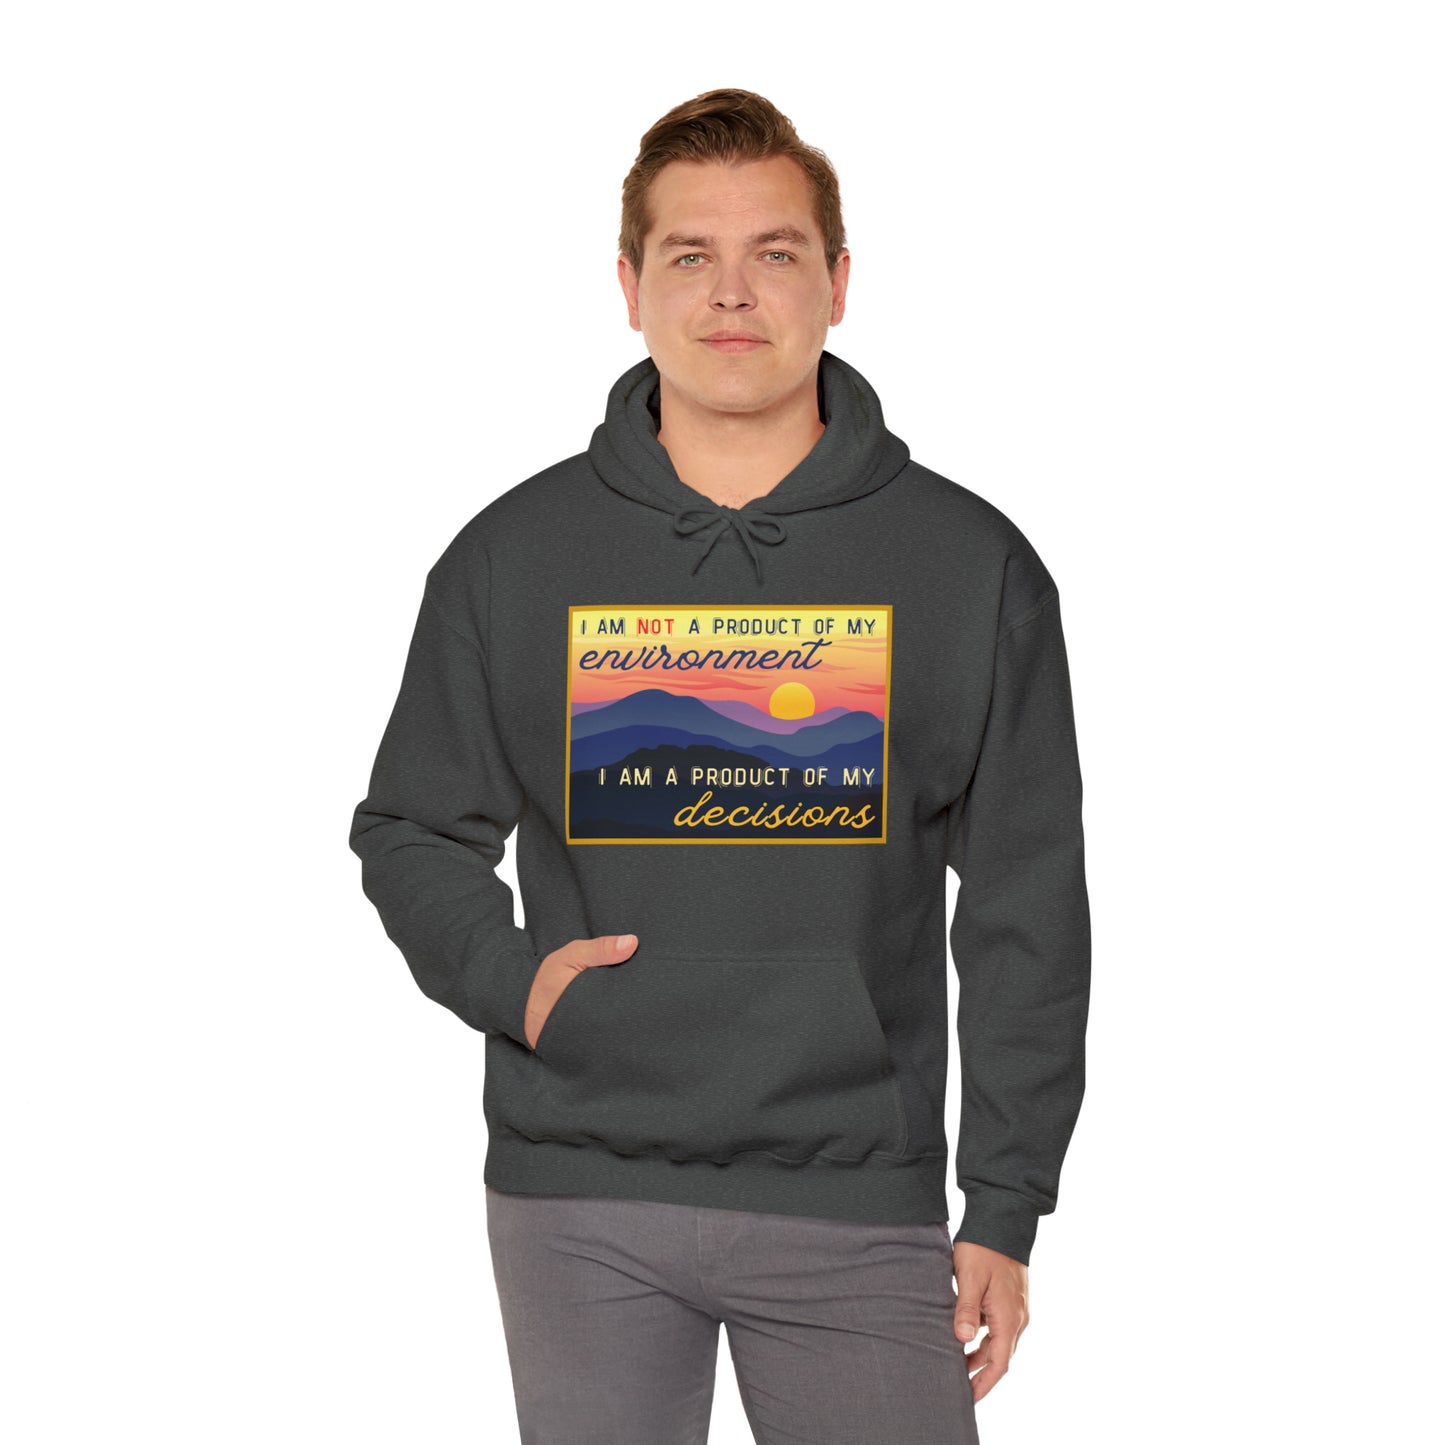 Unisex Heavy Blend™ Hooded Sweatshirt, Product of My Decisions, Motivation, Inspiration Hoodie